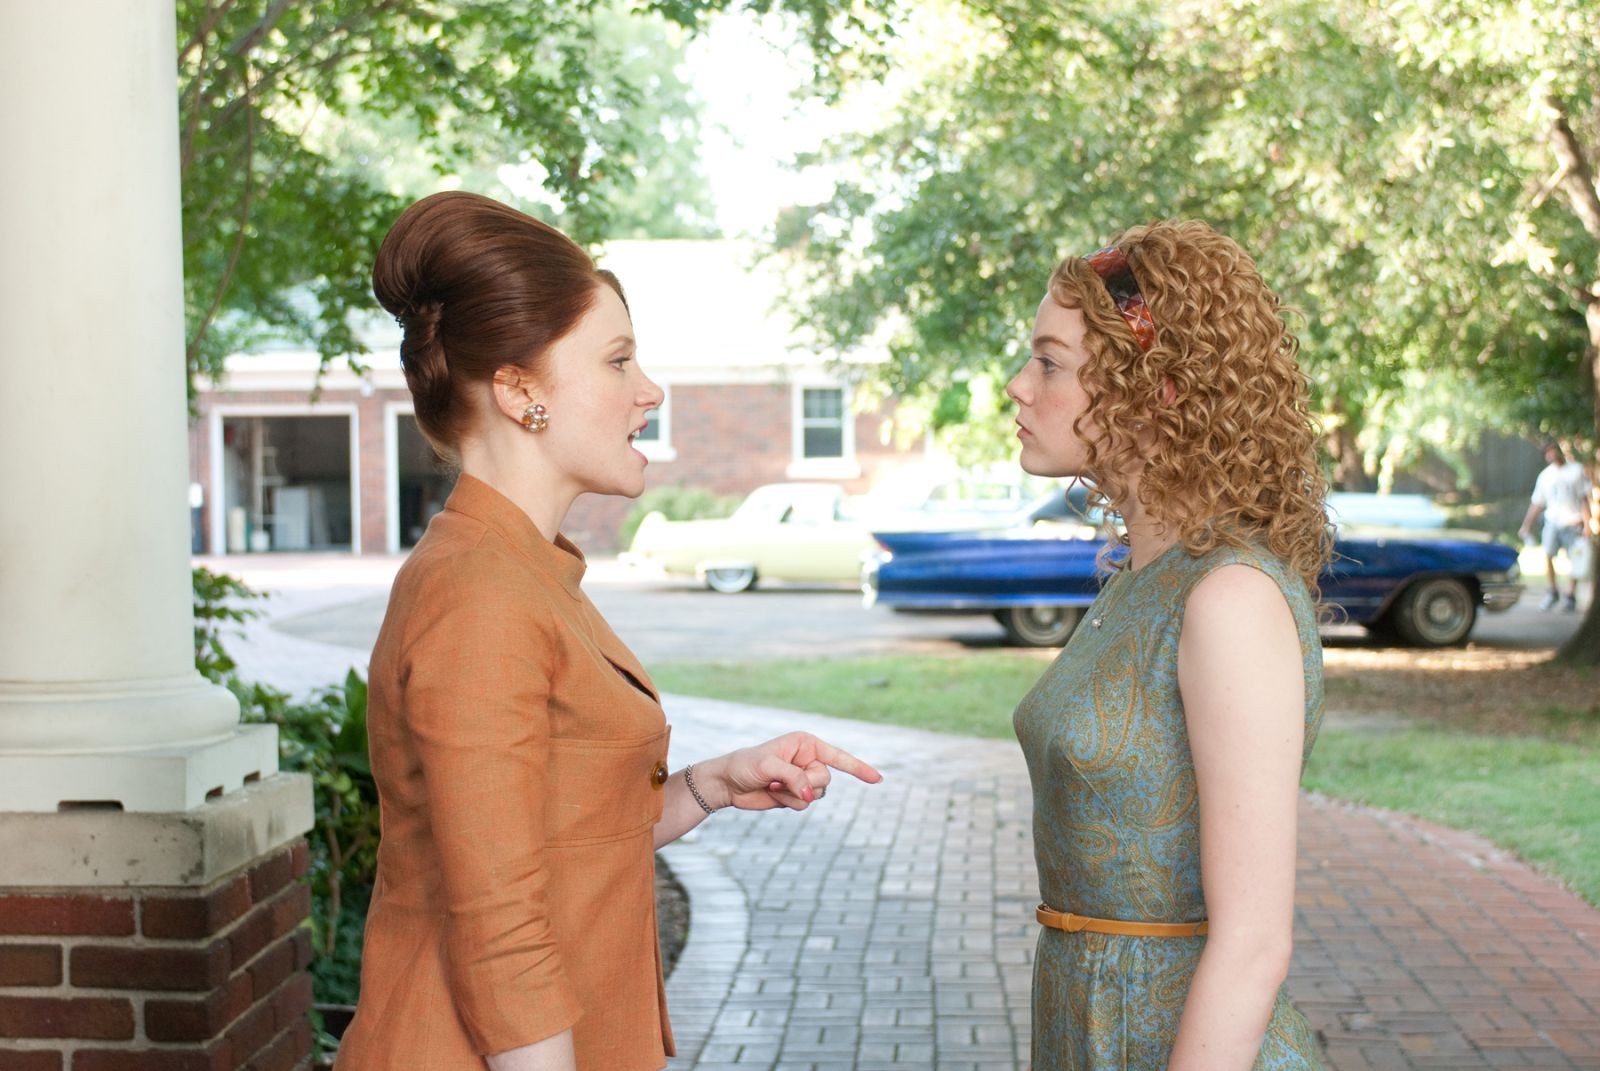 Bryce Dallas Howard stars as Hilly Holbrook and Emma Stone stars as Eugenia Phelan in DreamWorks SKG's The Help (2011)